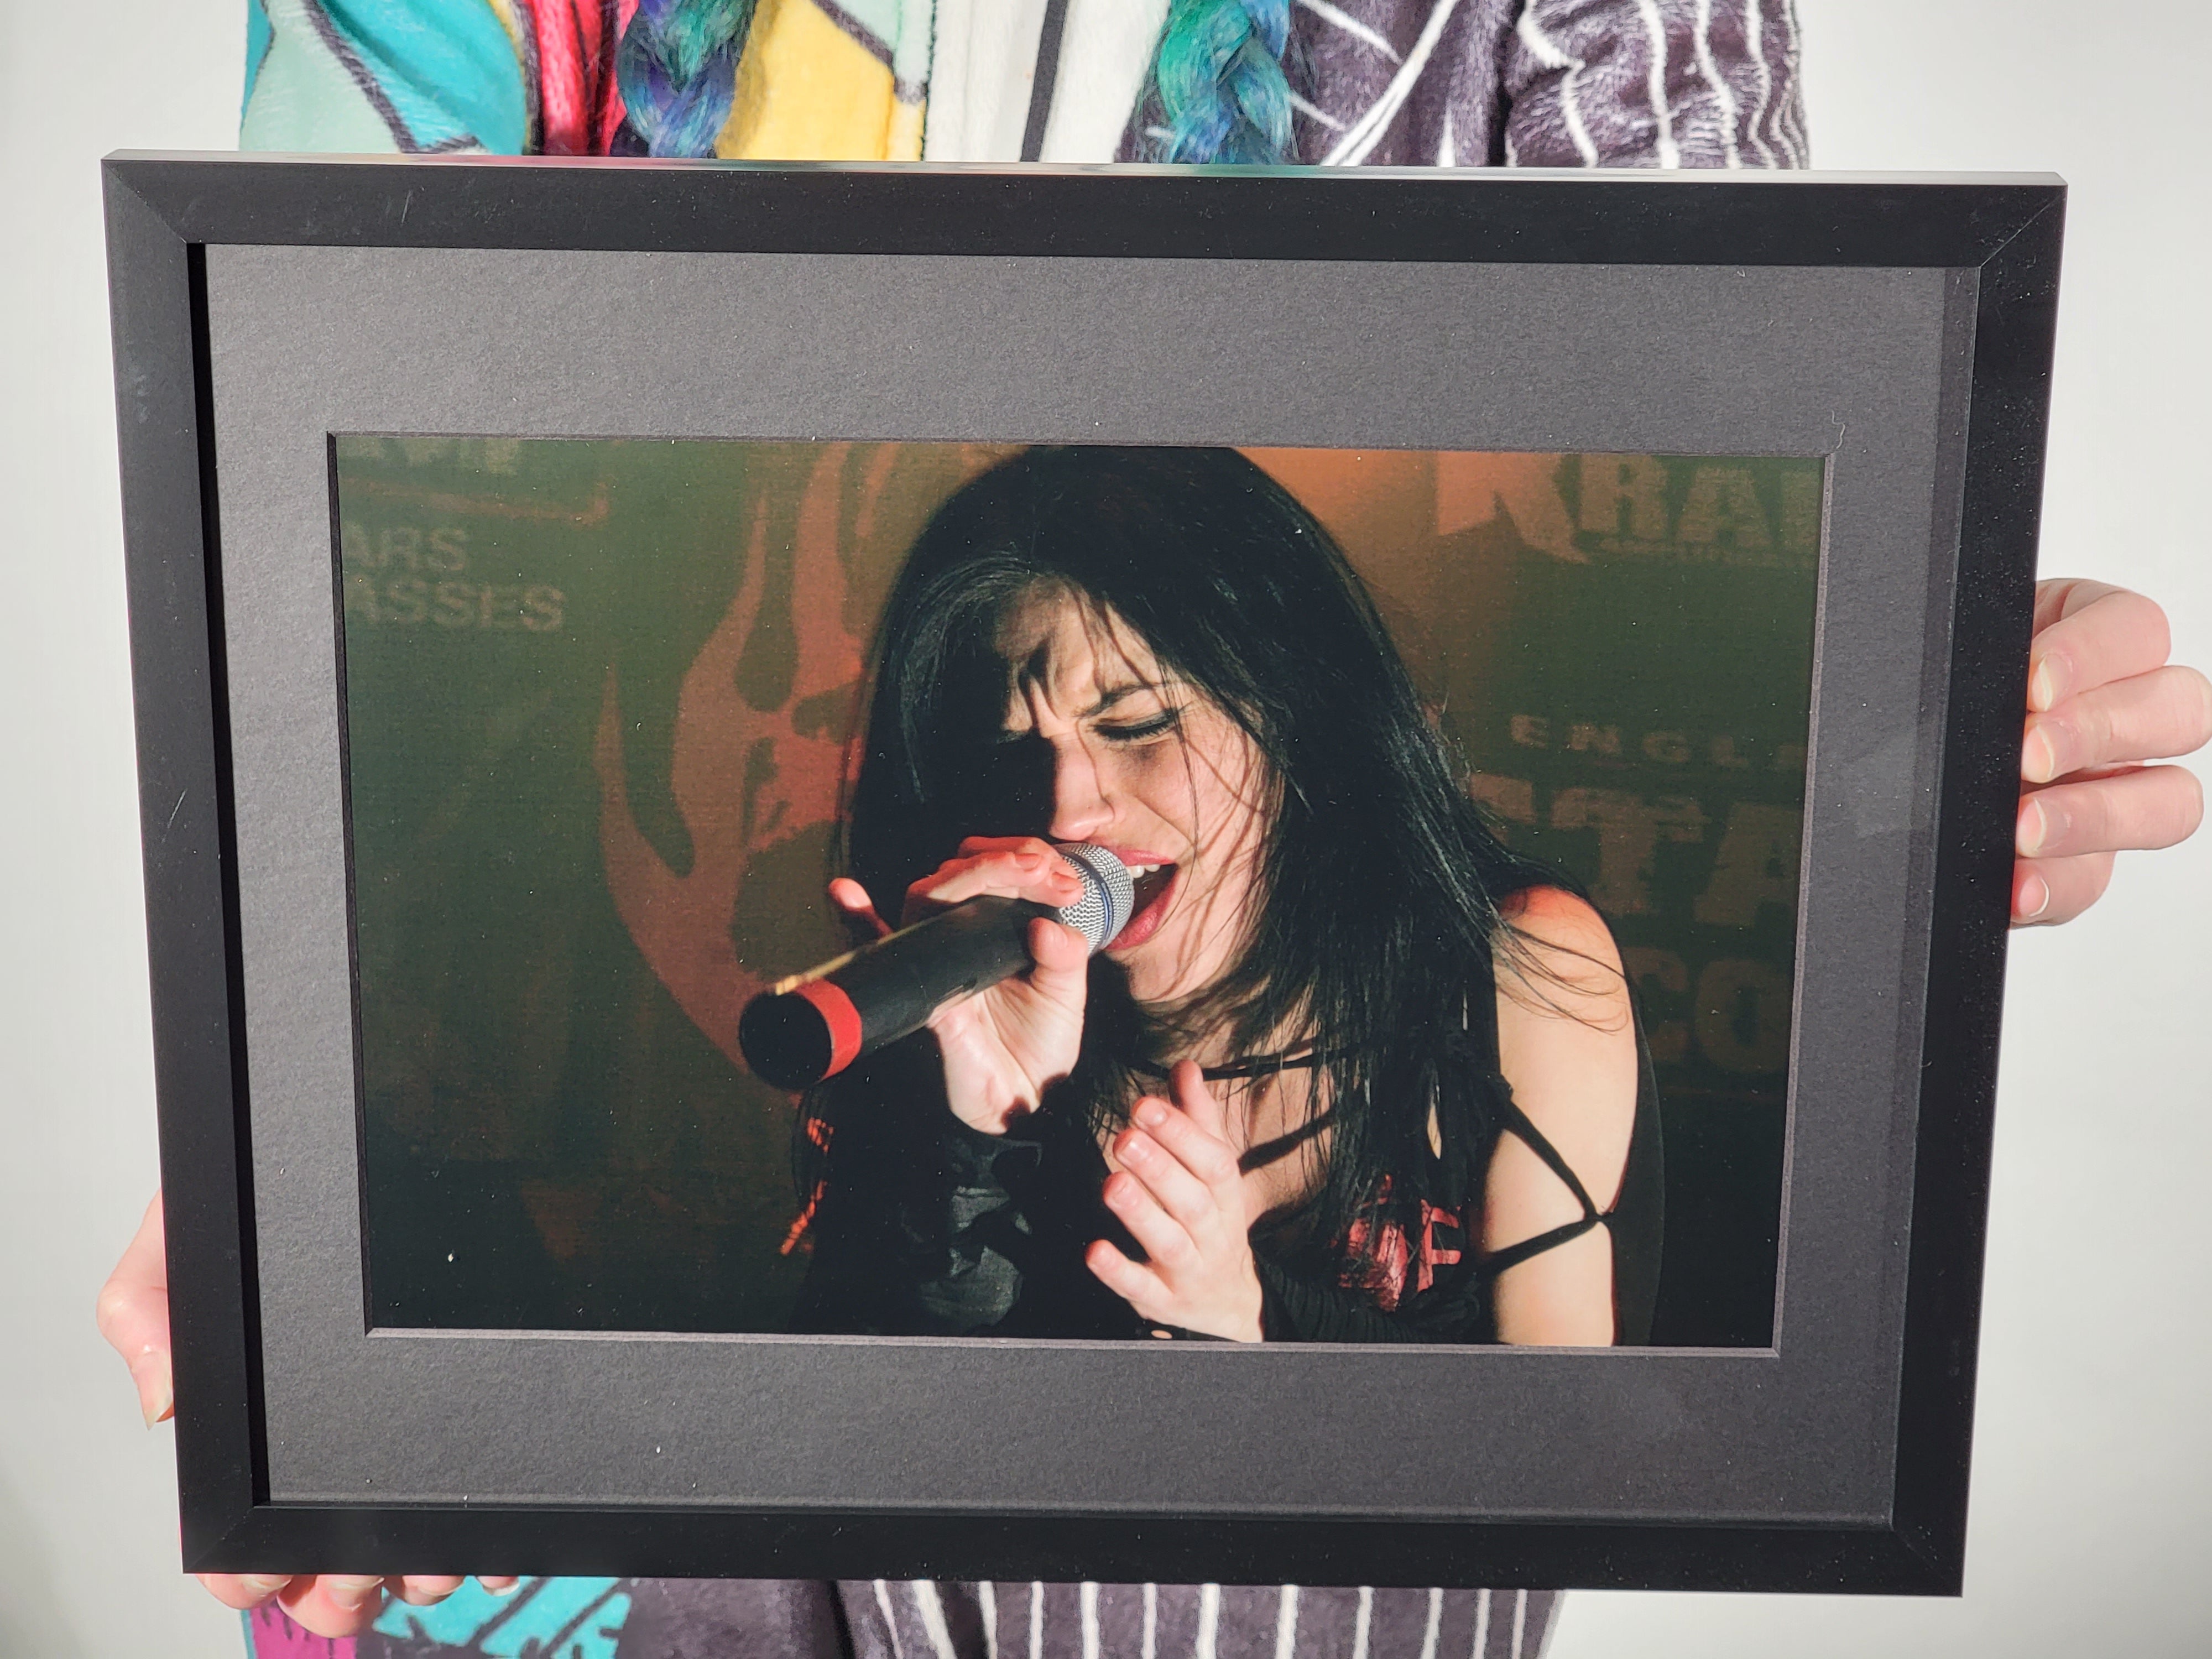 NEMHF Gallery: Cristina Scabbia - framed crystal pearl print (1 of 1)